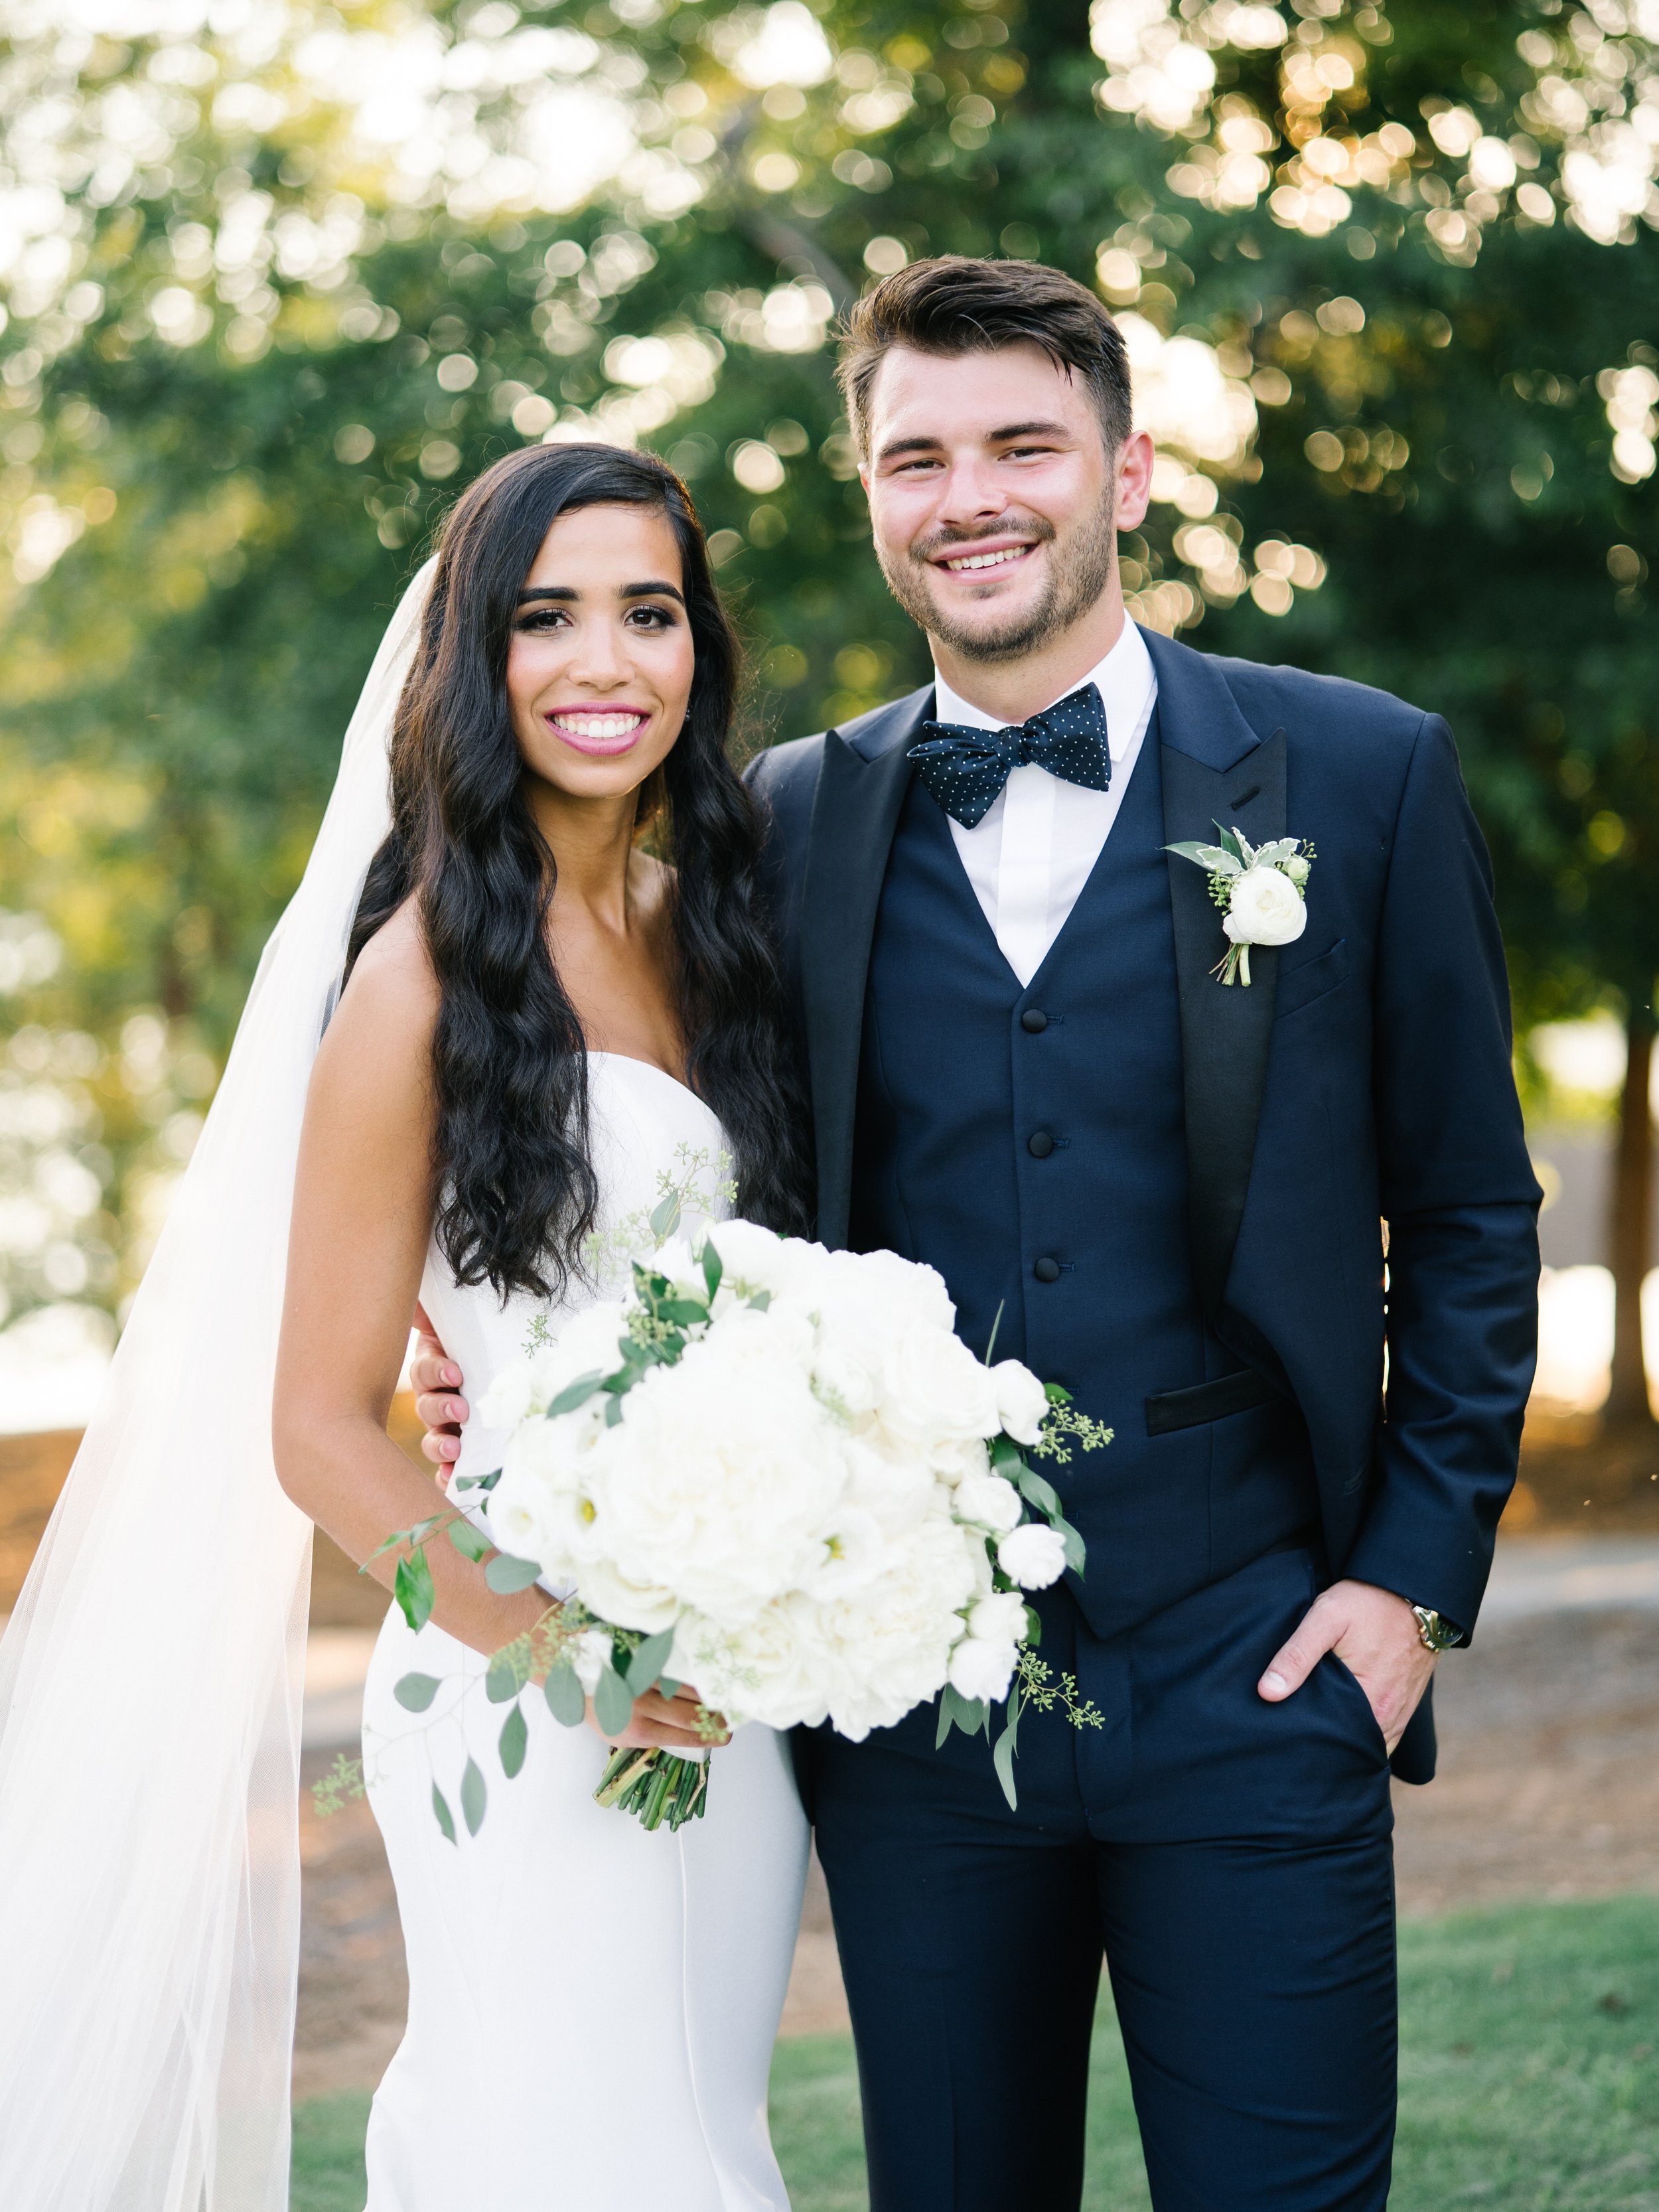 Nora & Reed — Like the Dazzling Weddings